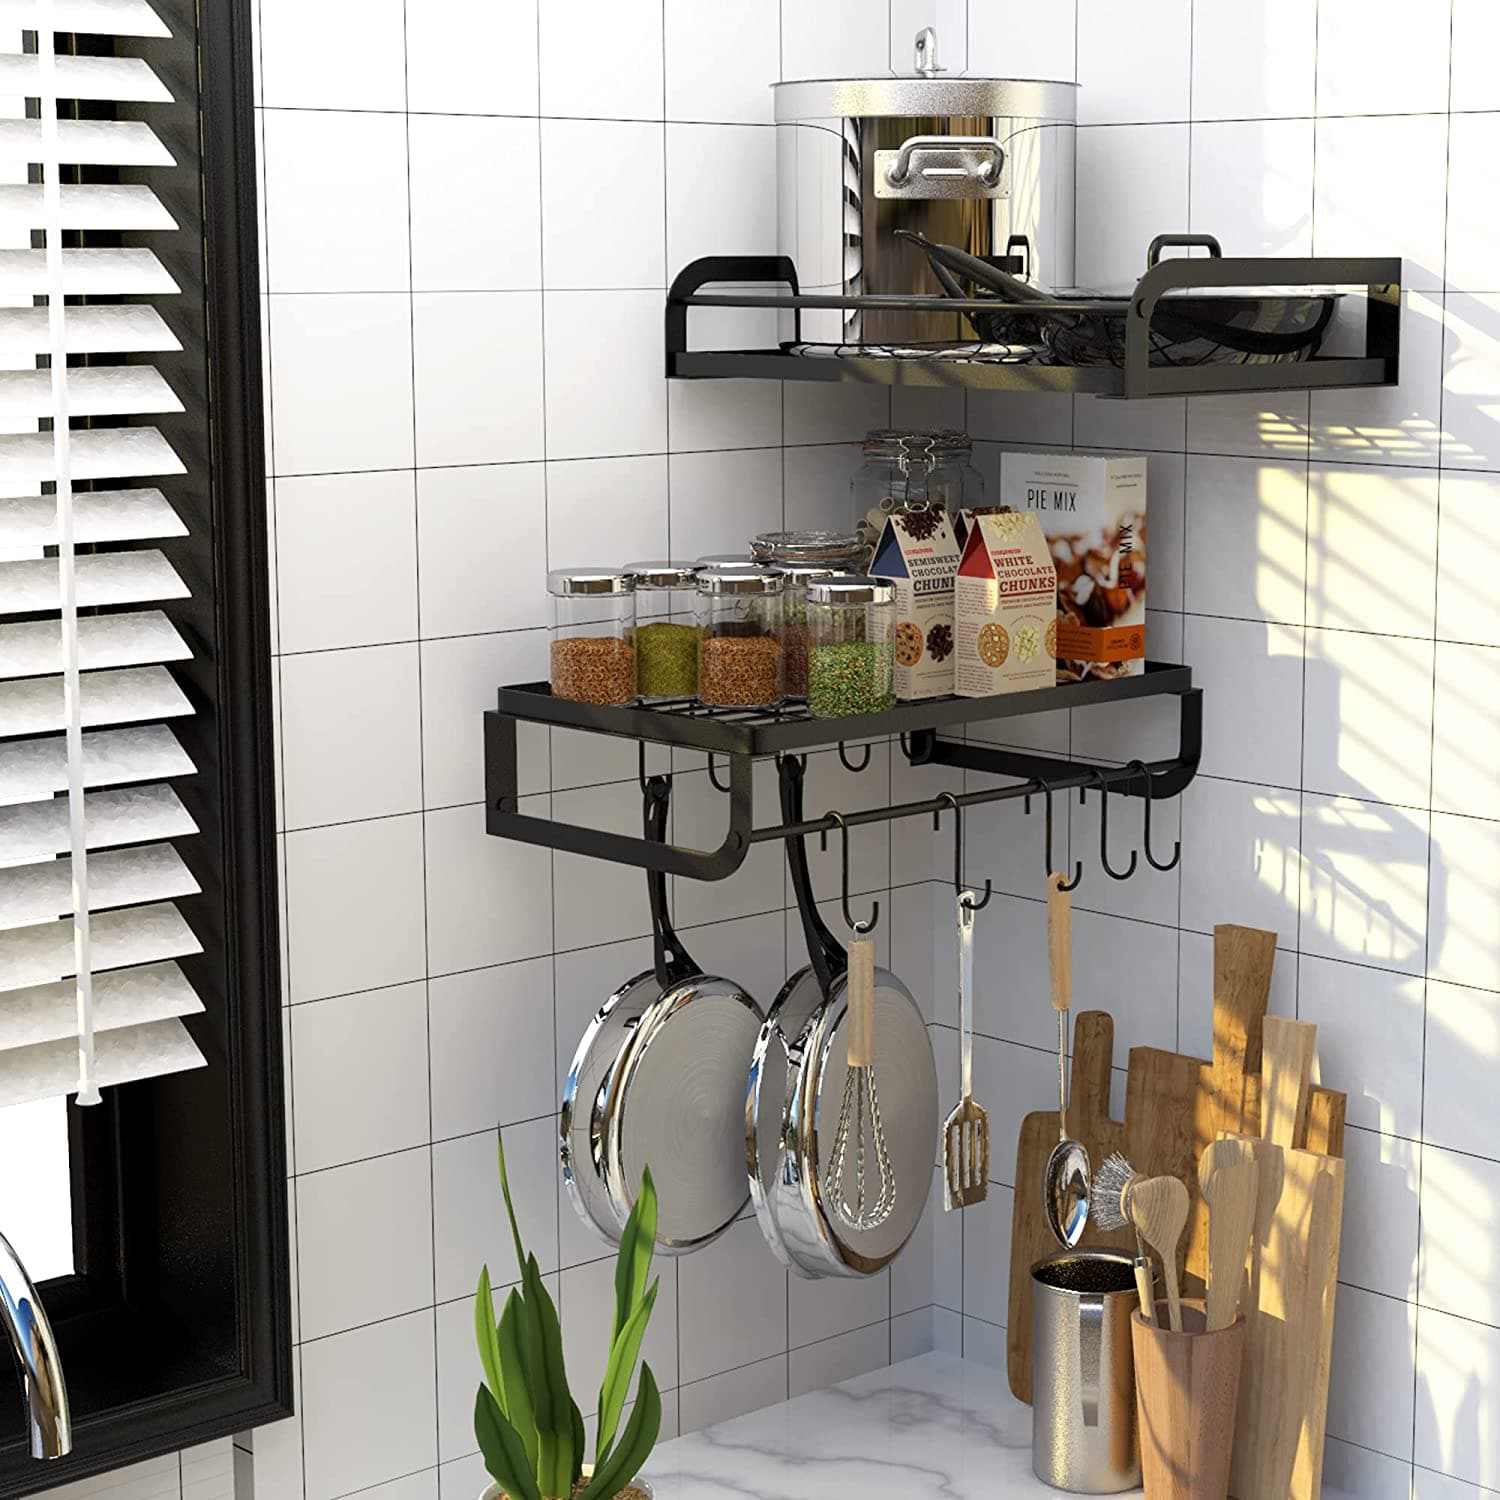 Etechmart Hanging Pot Rack,3 In Wall Mounted Pan Pot Holder with 10P